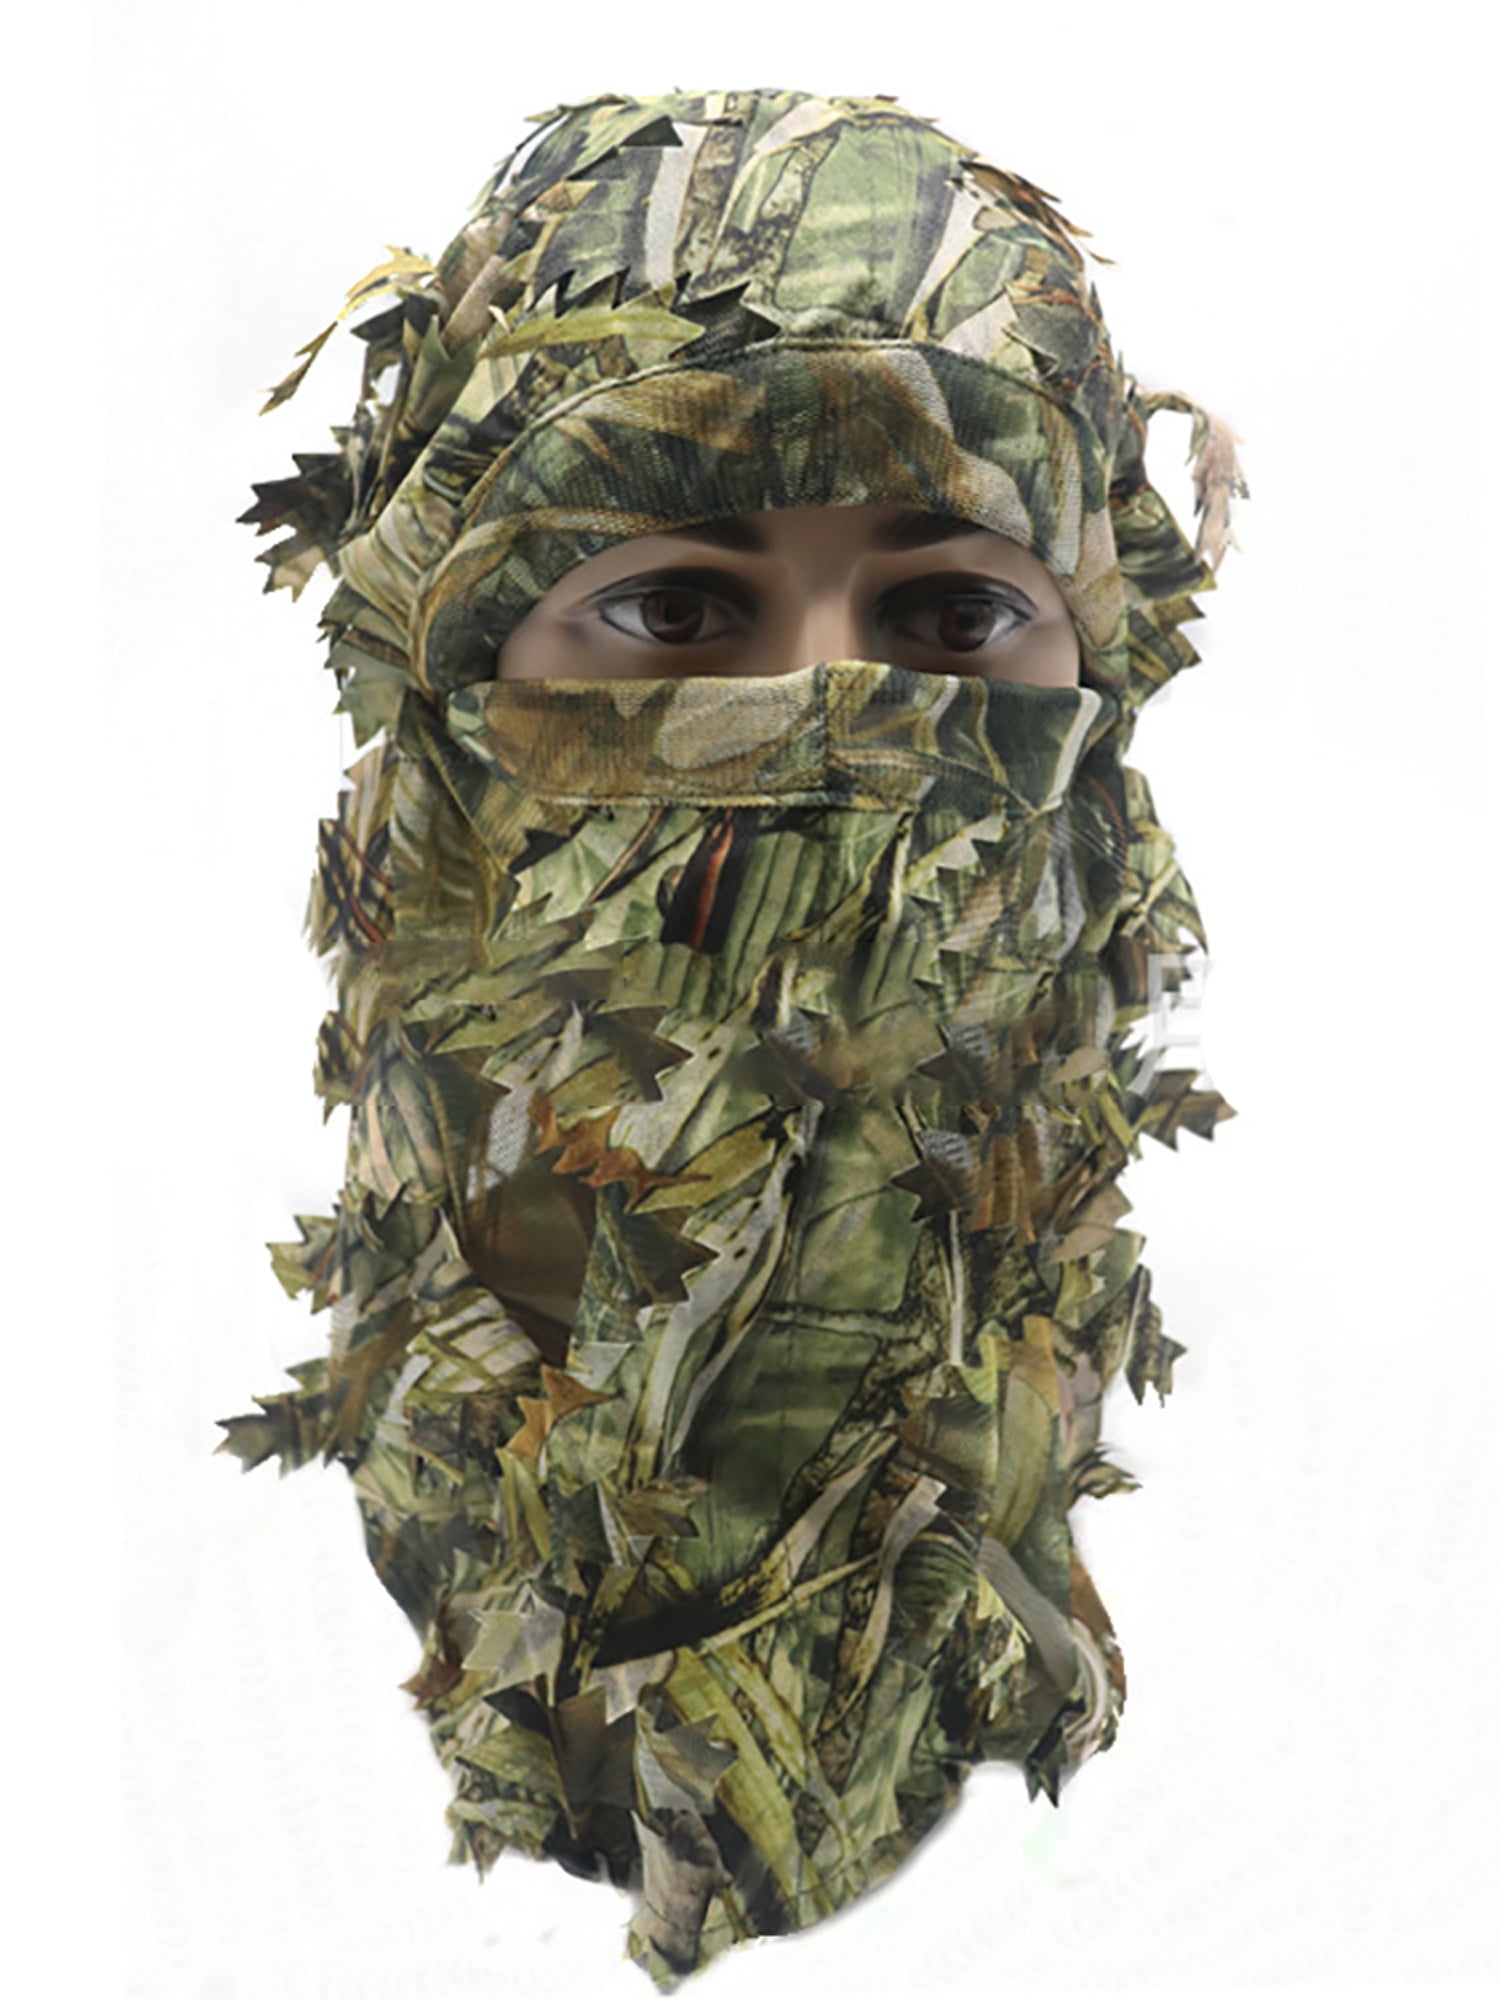 3D Sneaky Hunting/face Mask Camo Head Net mesh Woodland MO face turkey deer Hats